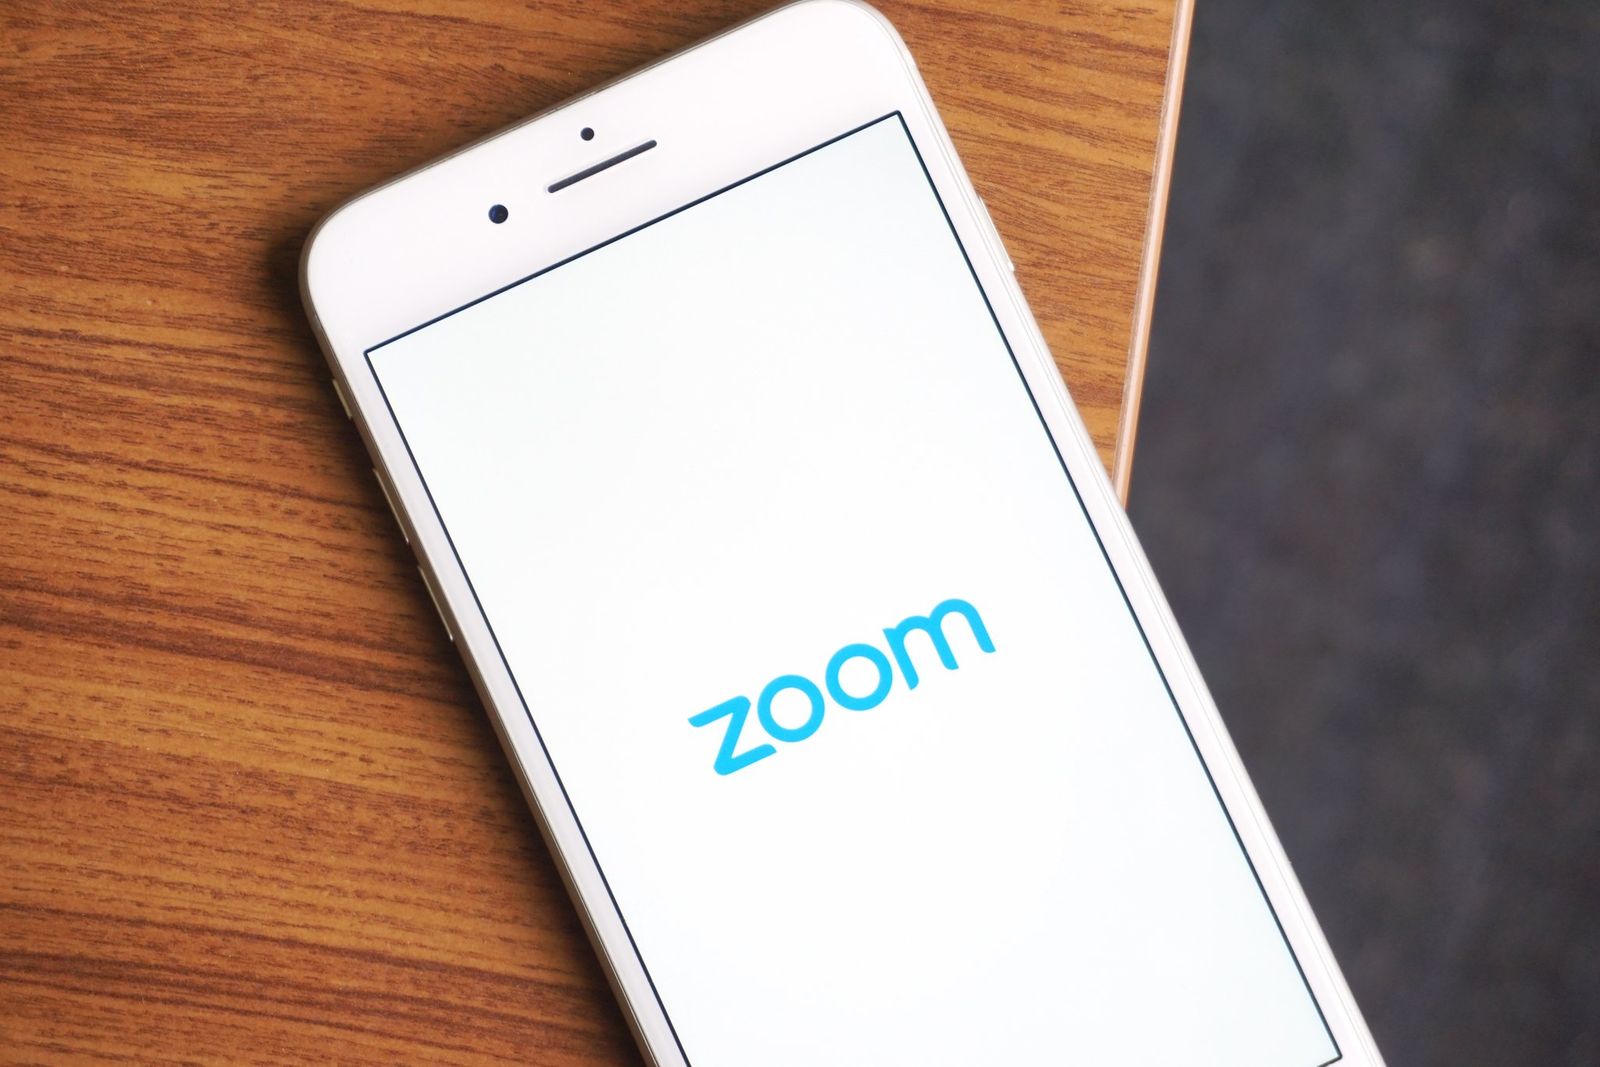 Zoom Alternatives: 4 Super-Secure Apps For Private Video Calls